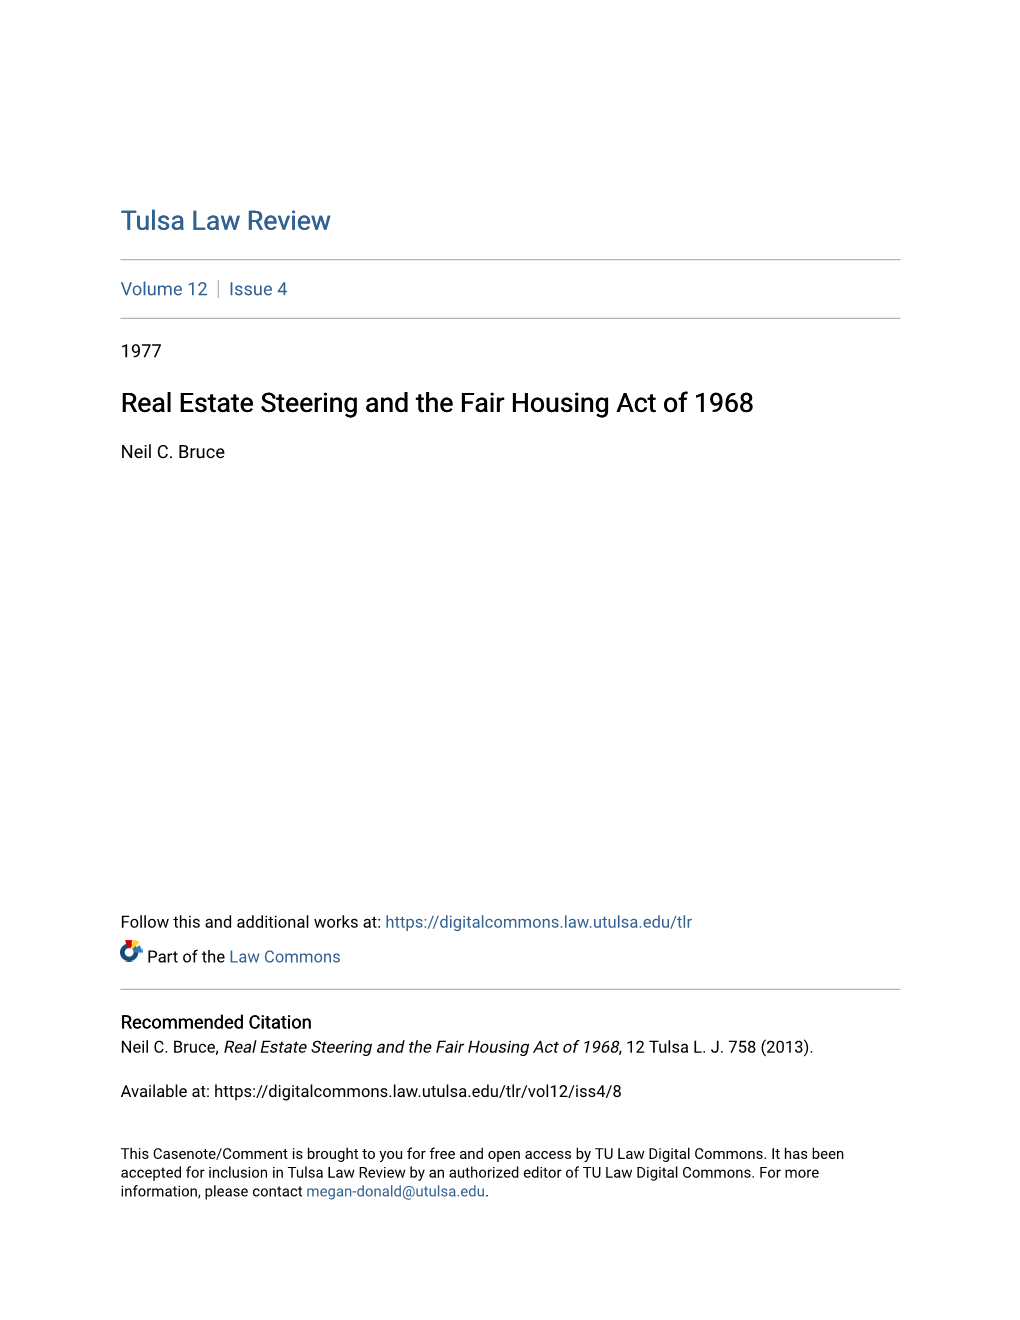 Real Estate Steering and the Fair Housing Act of 1968